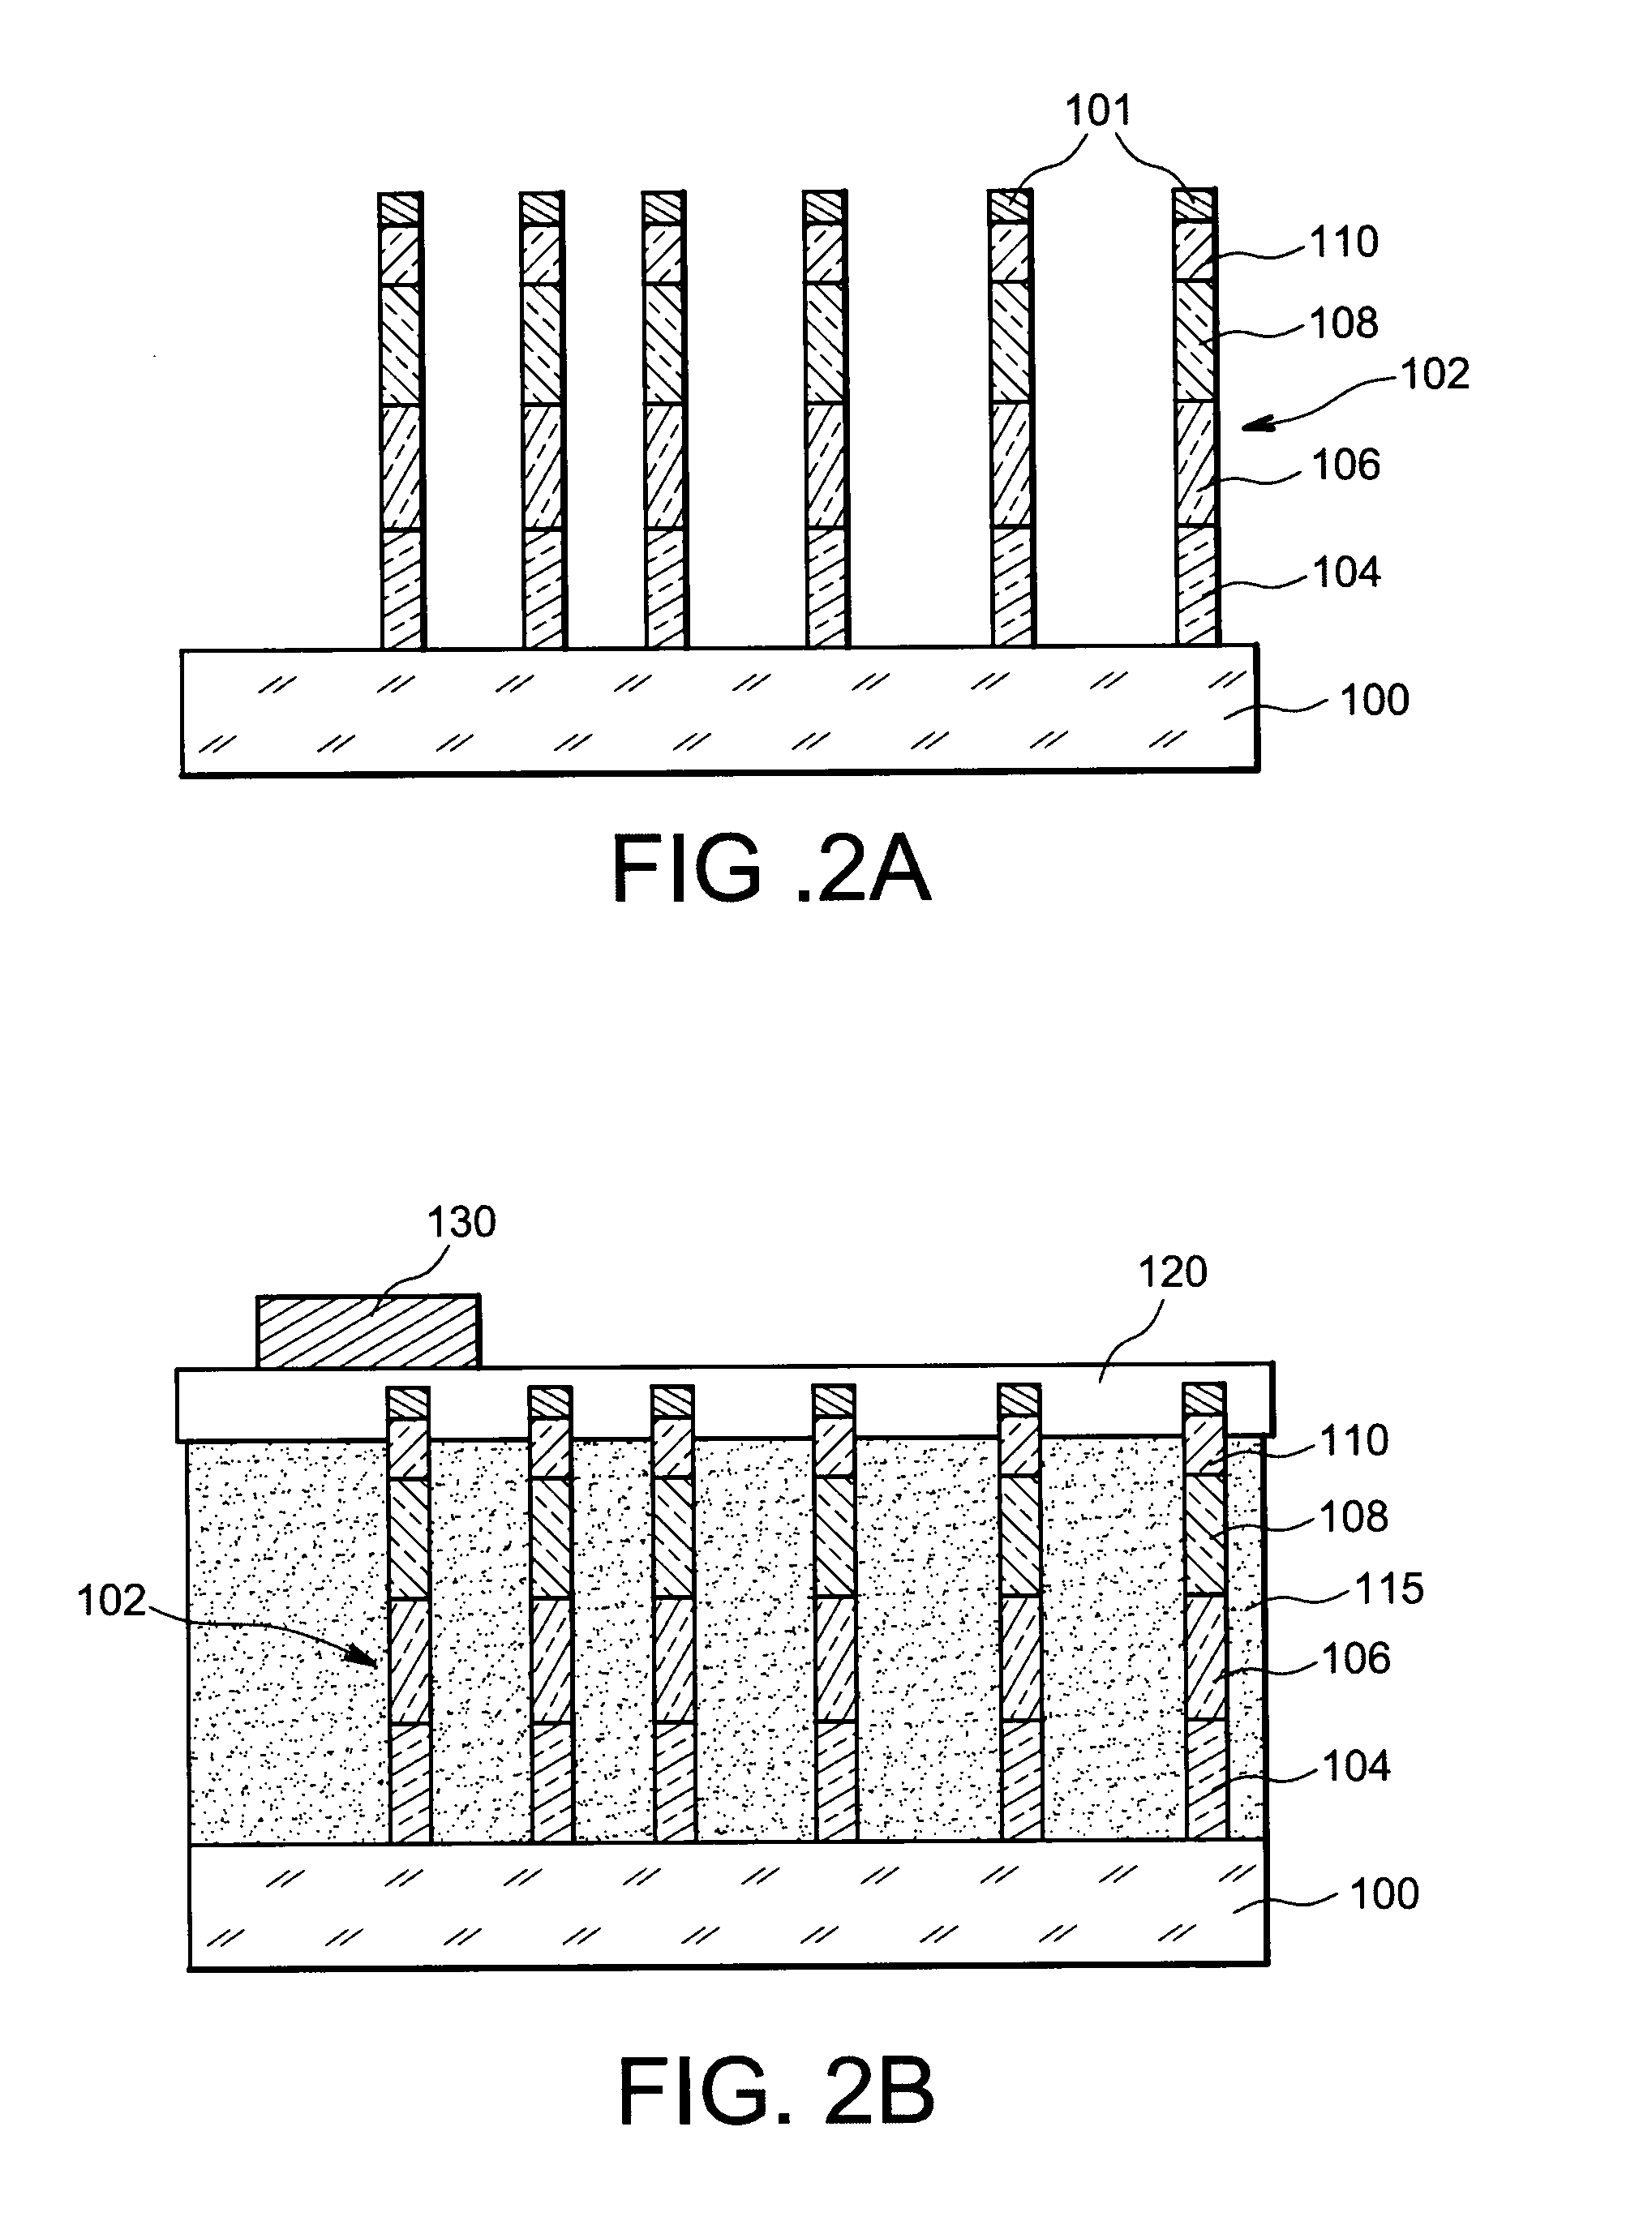 Process of making a microelectronic light-emitting device on semi-conducting nanowire formed on a metallic substrate